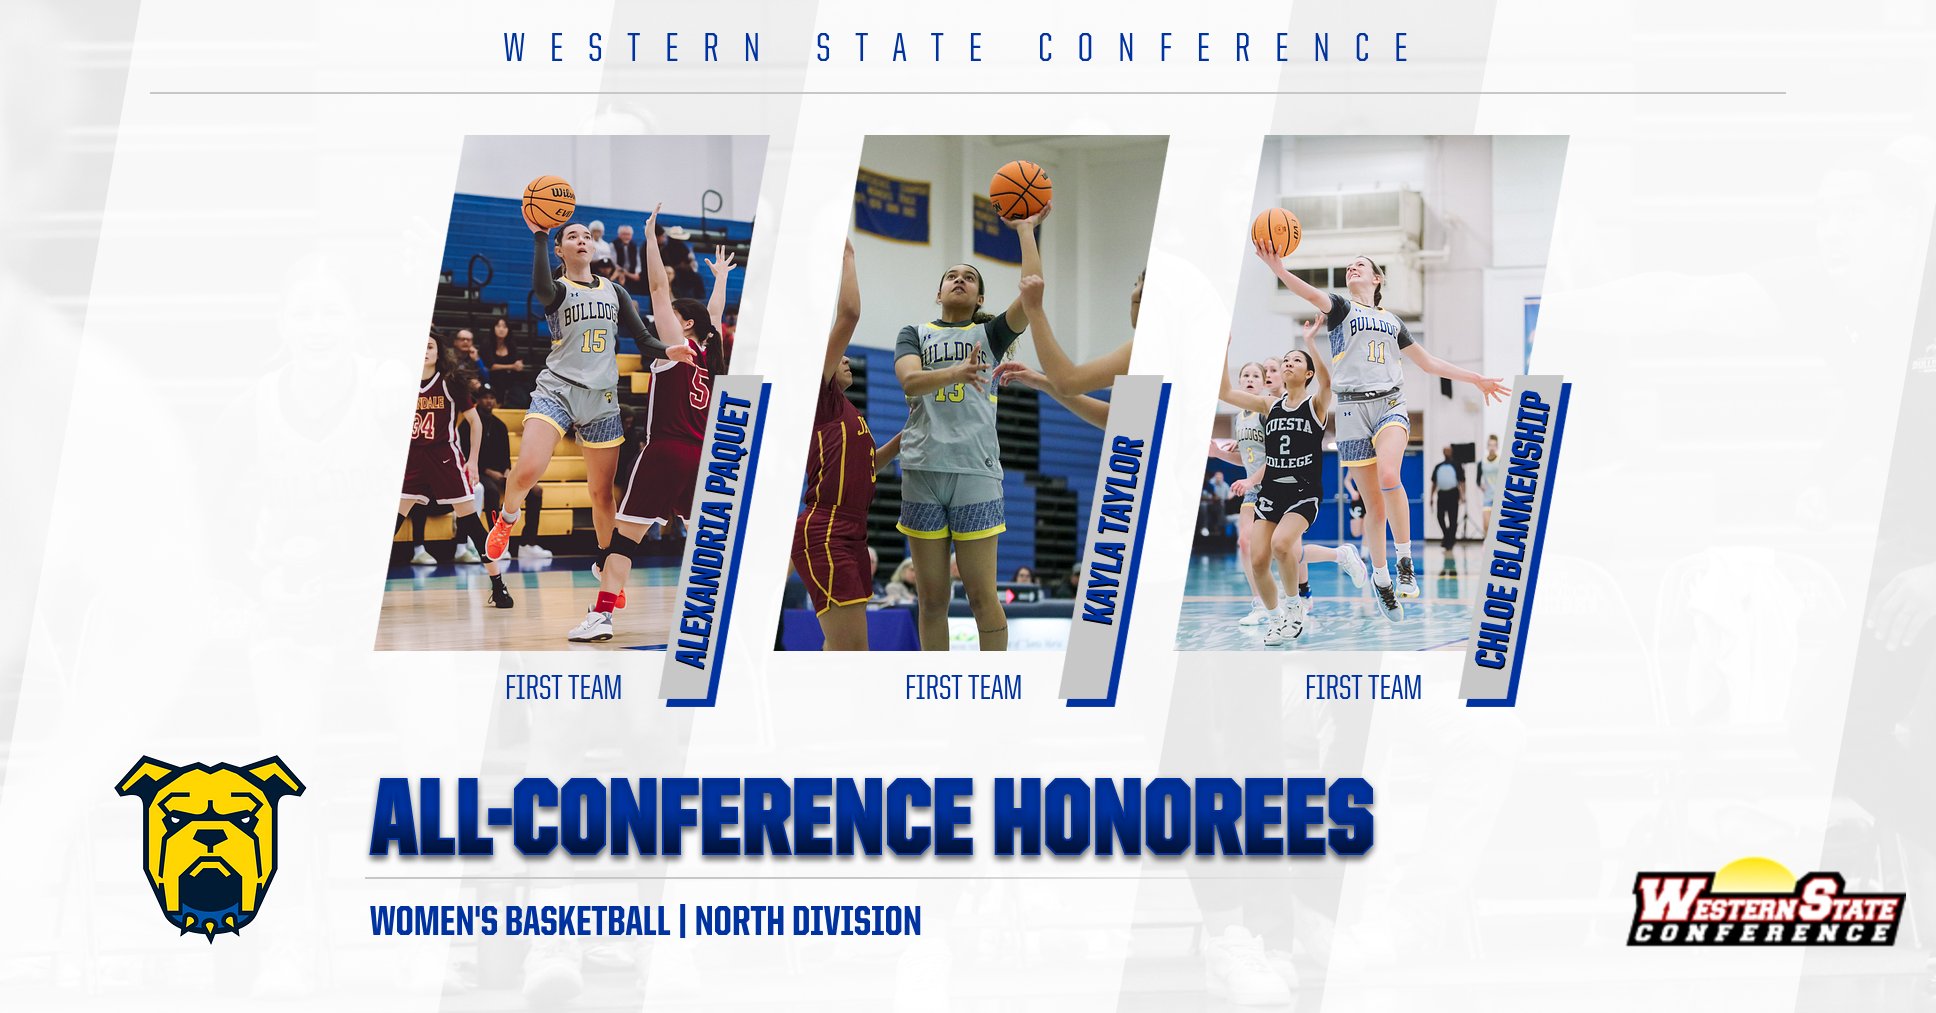 Three Earn All-Conference Honors for Women's Basketball